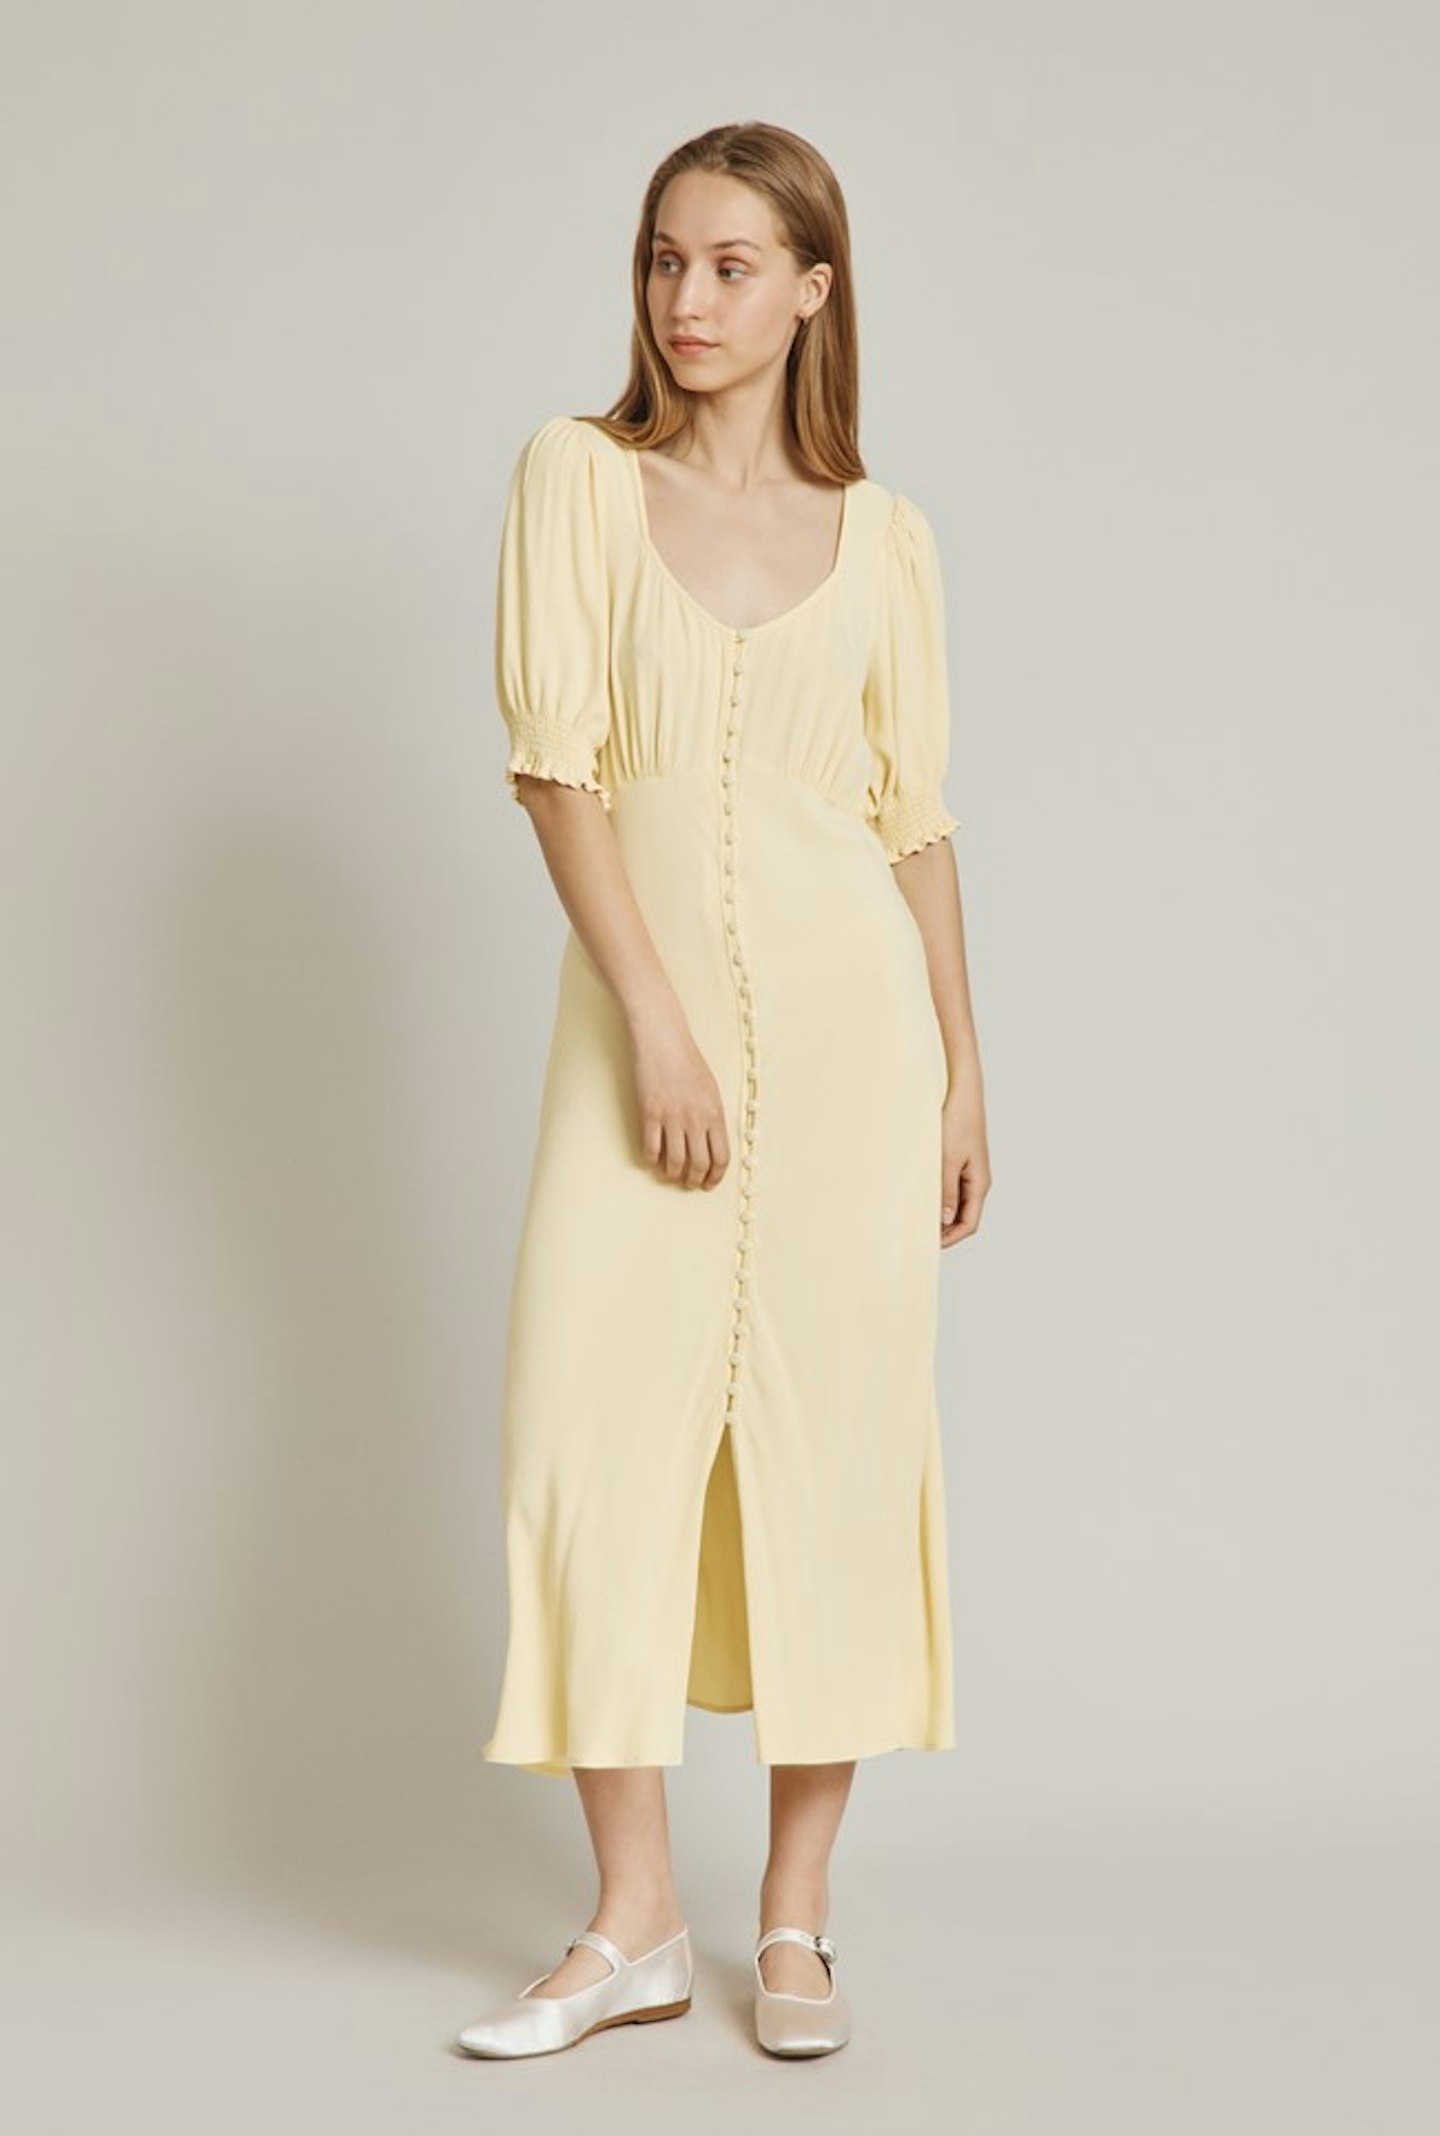 Ghost, Coco Dress Buttercup, £129